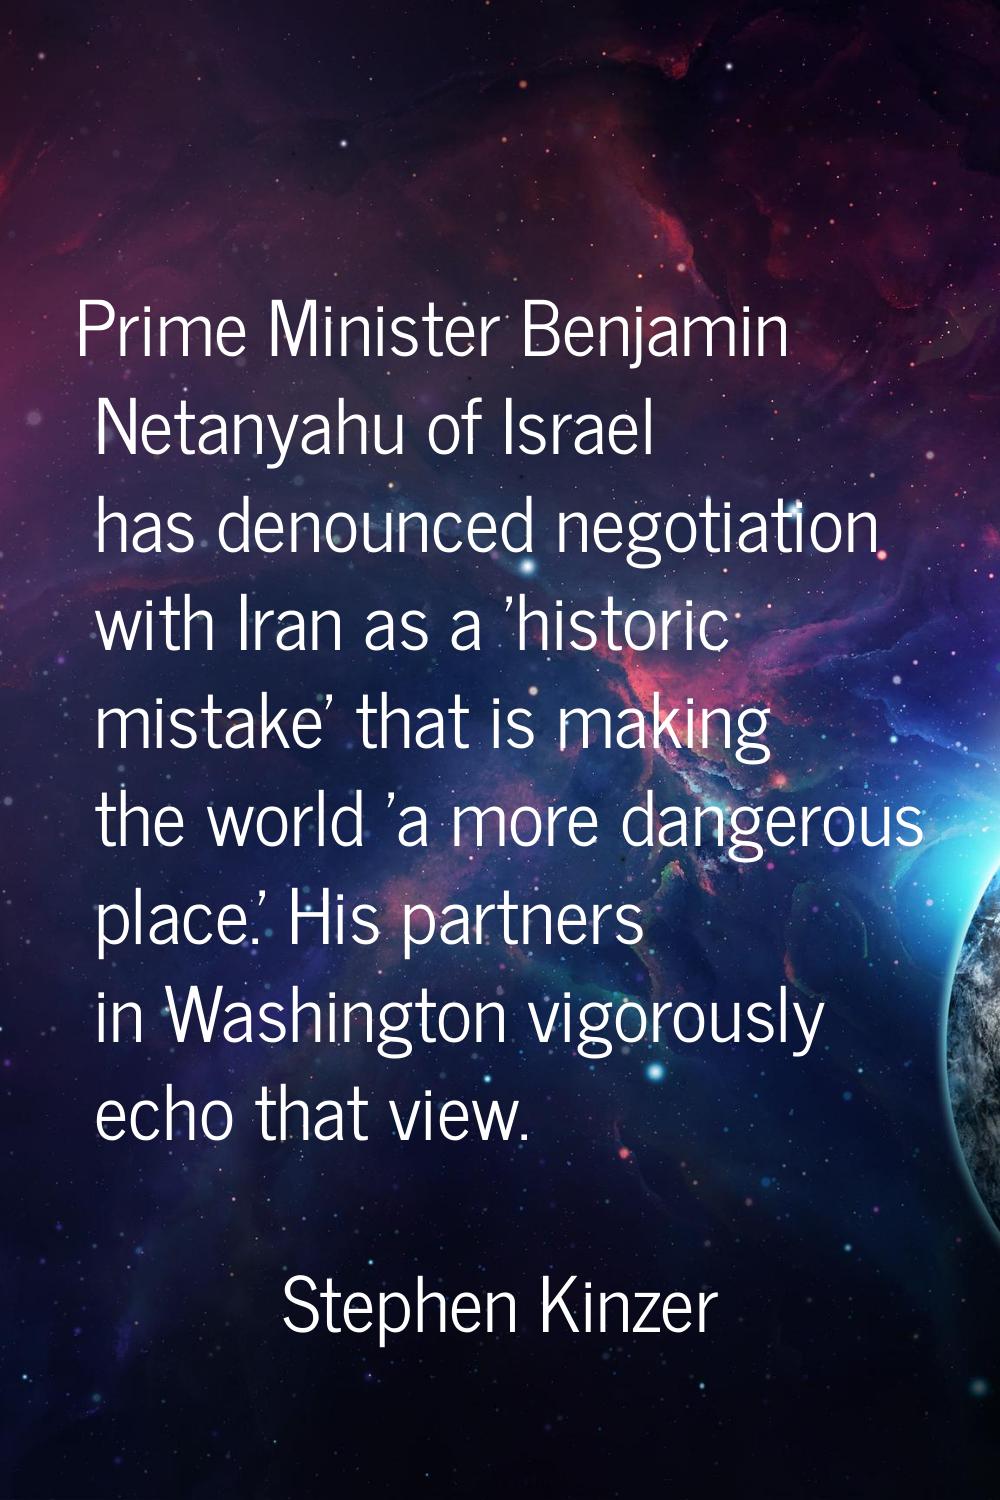 Prime Minister Benjamin Netanyahu of Israel has denounced negotiation with Iran as a 'historic mist